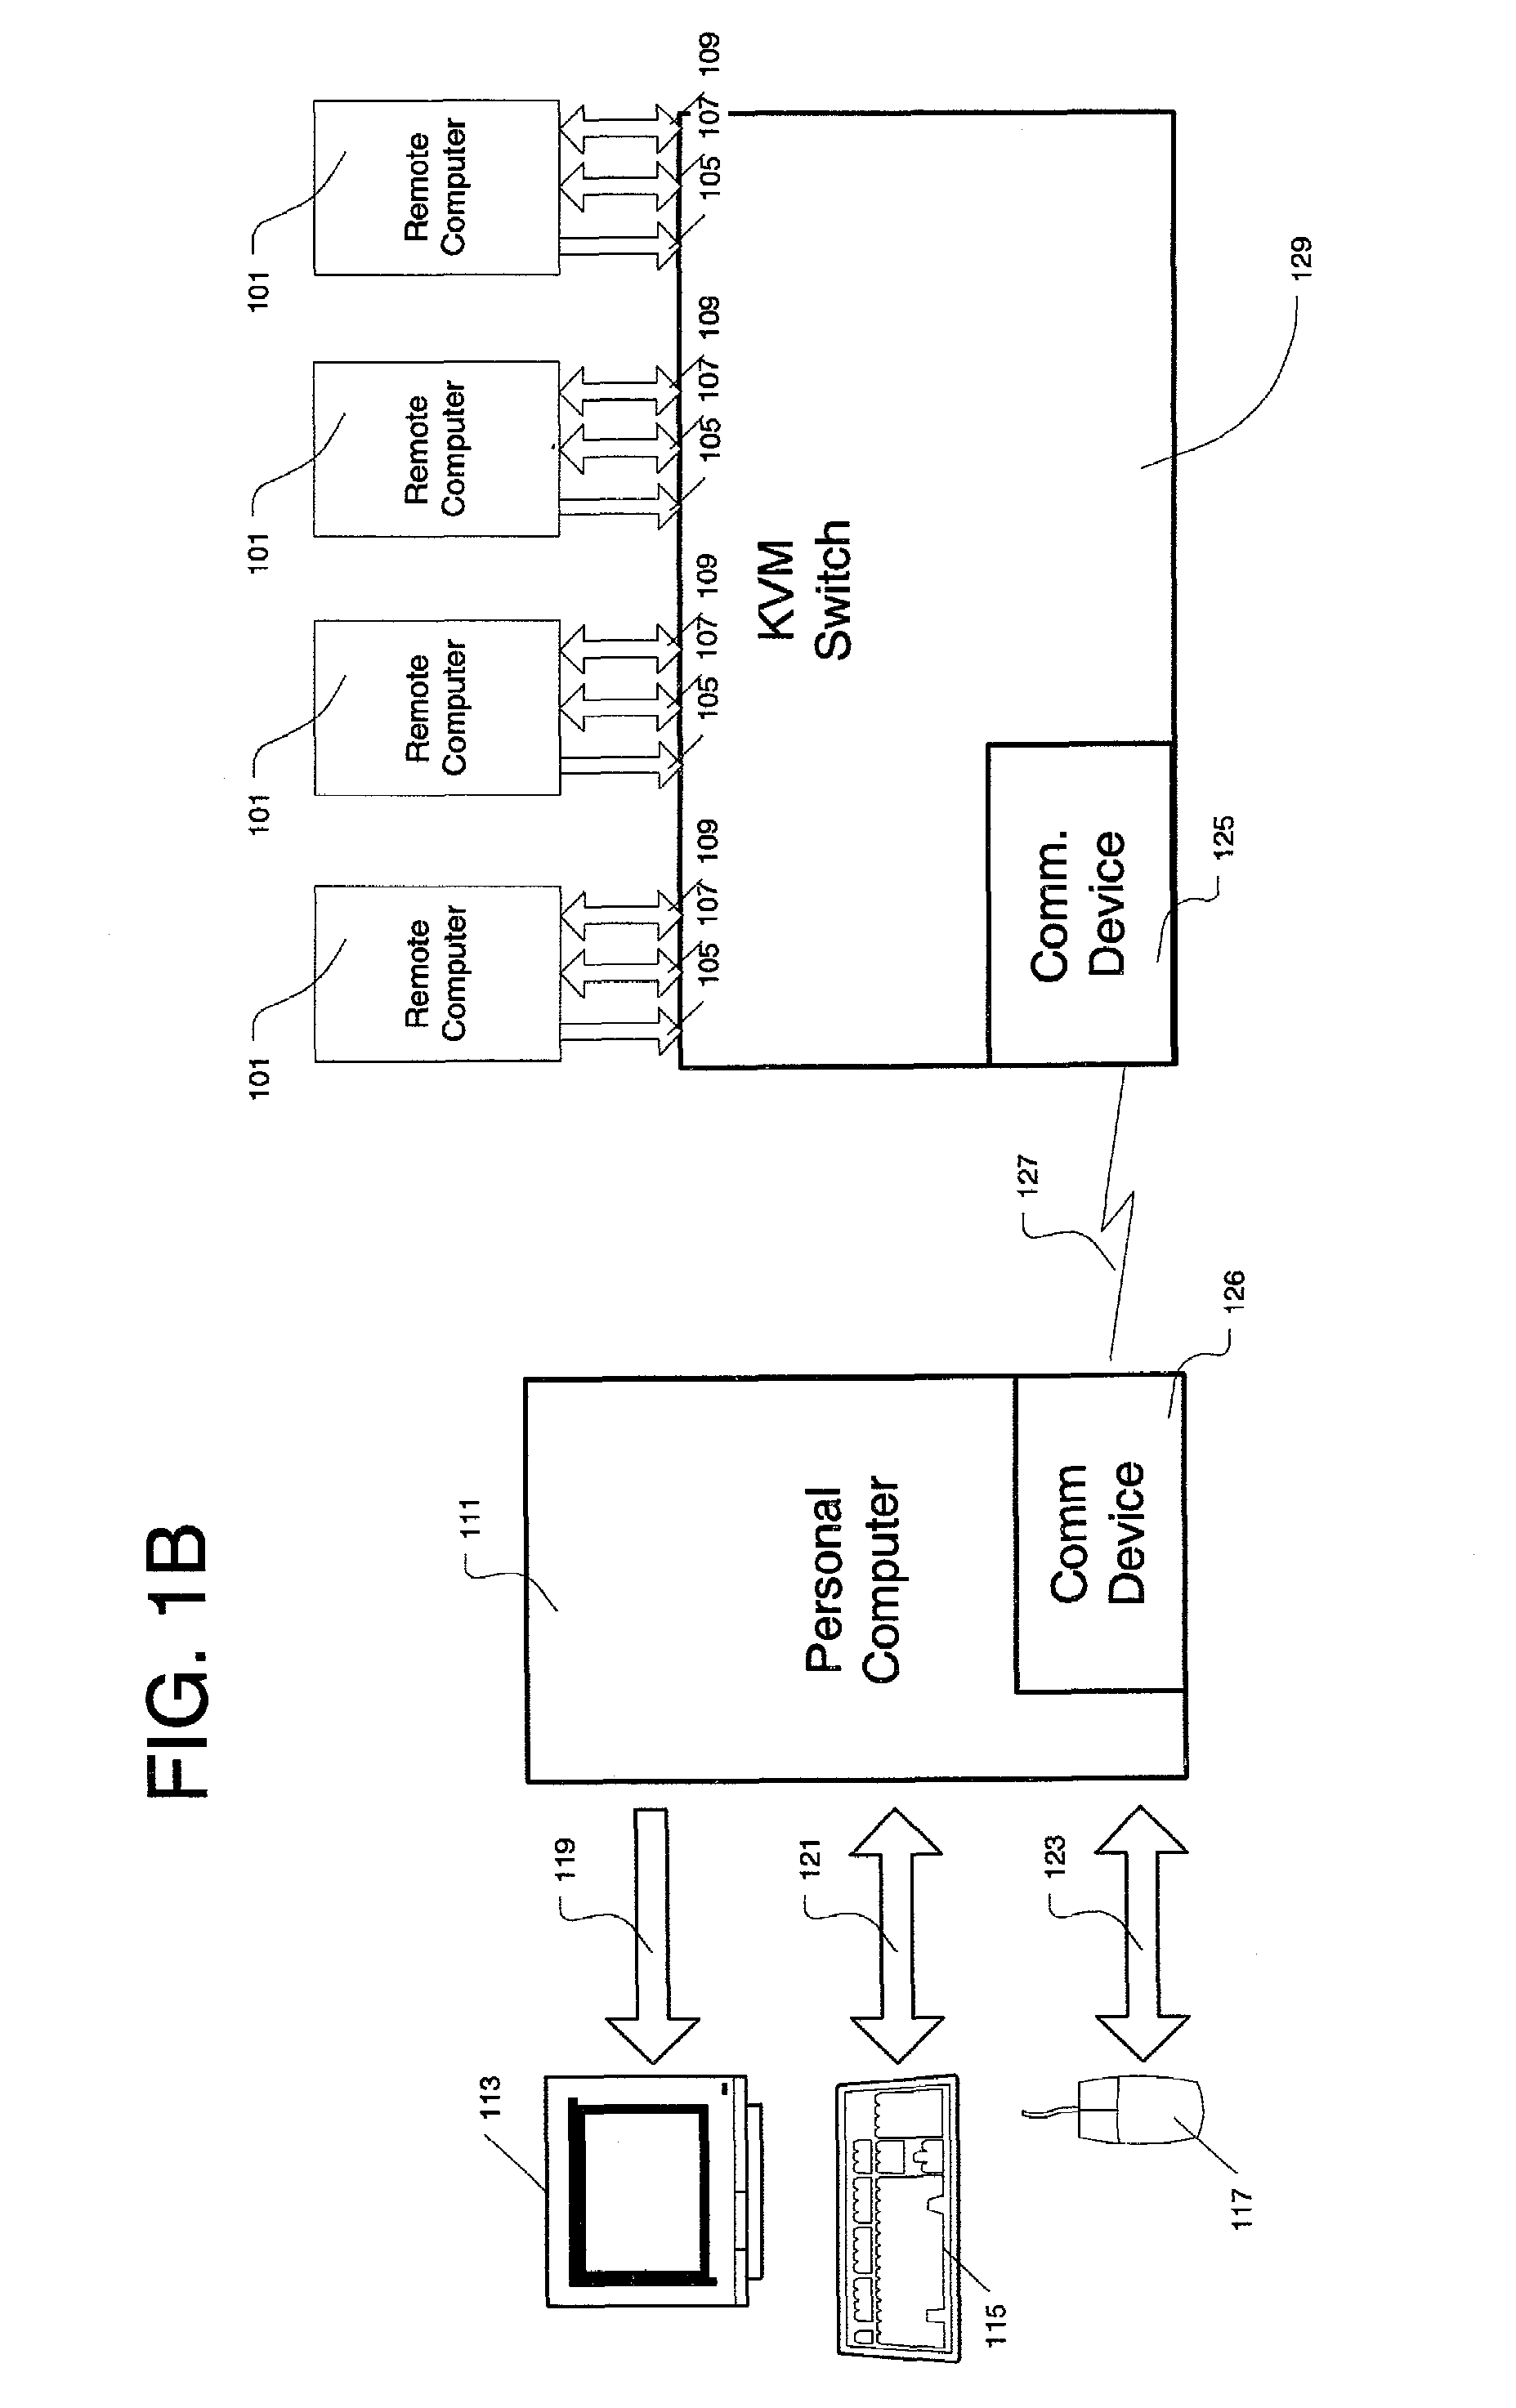 Method and apparatus for digitizing and compressing remote video signals